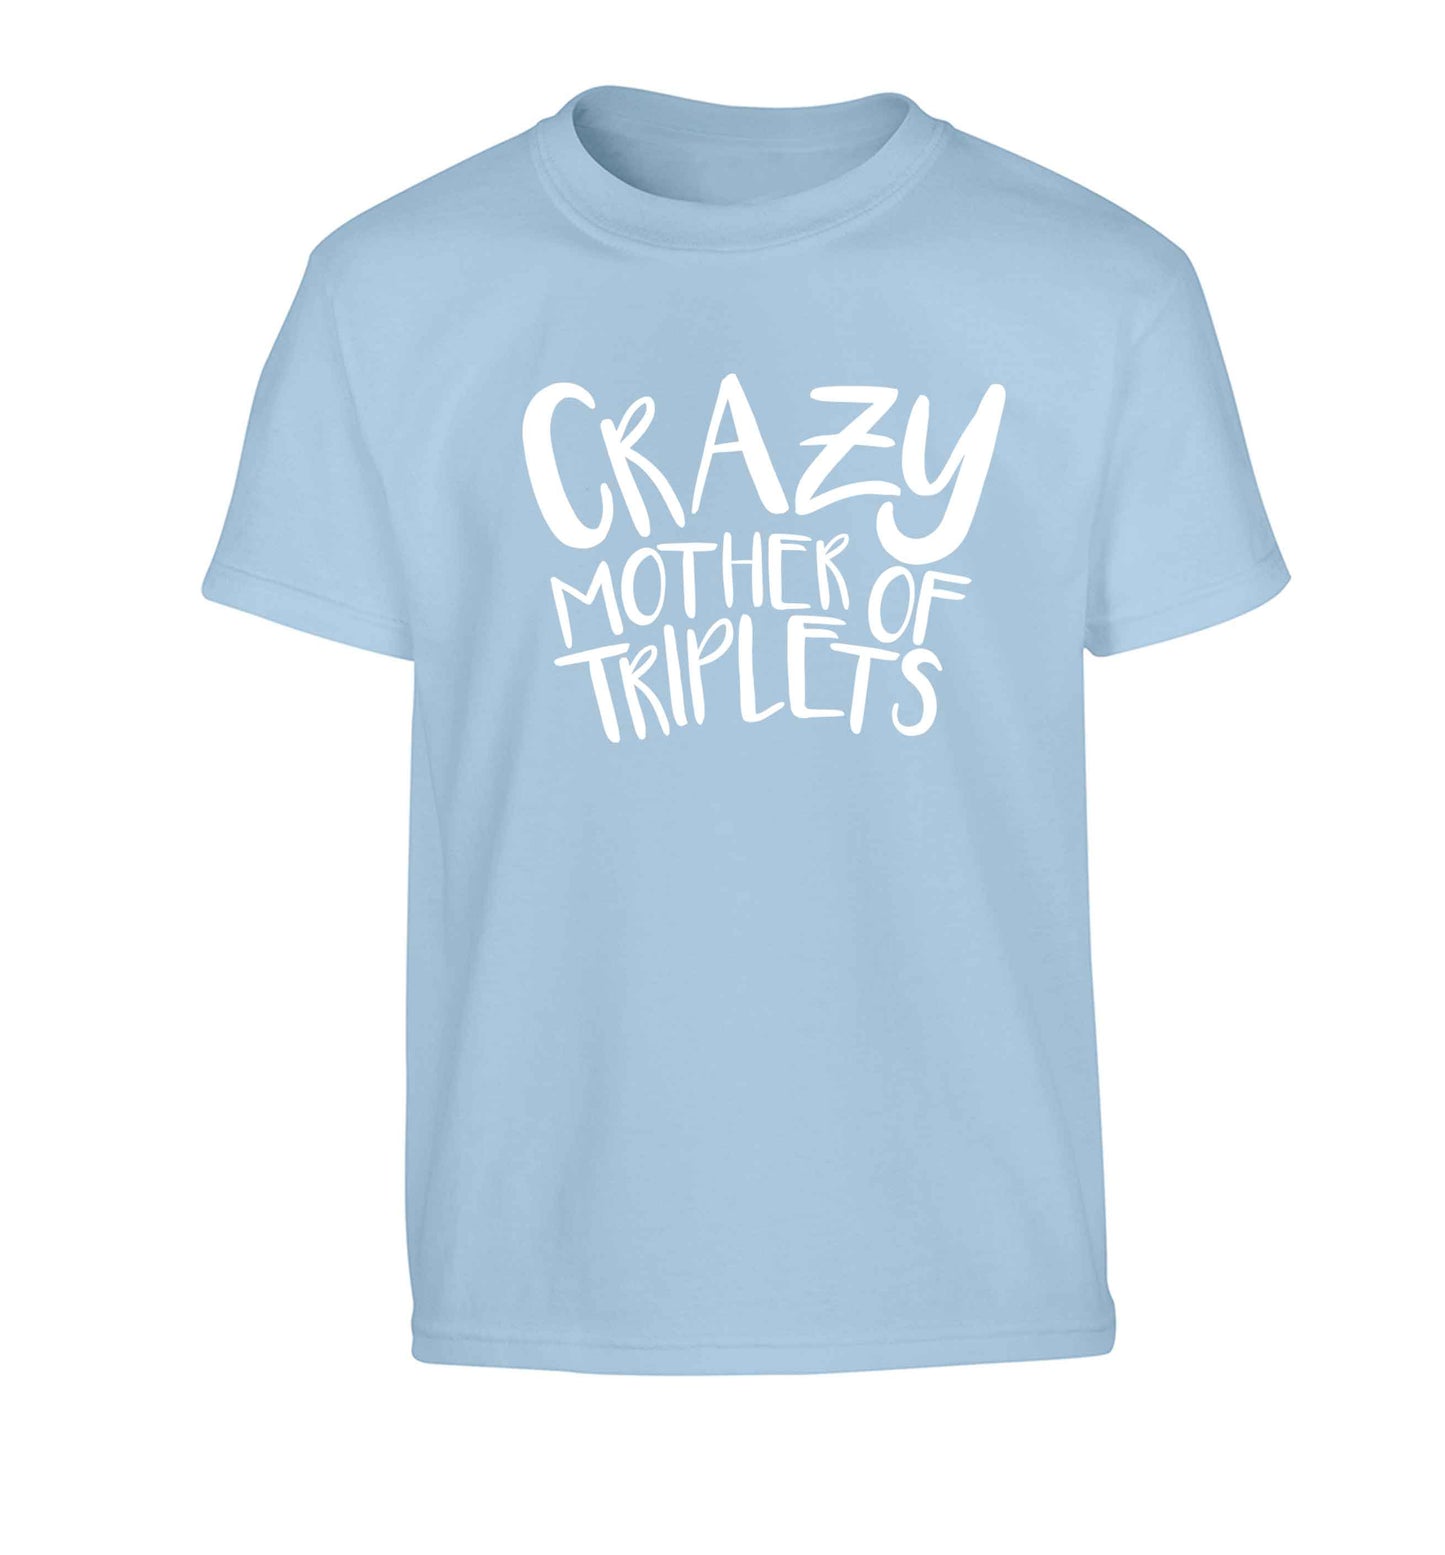 Crazy mother of triplets Children's light blue Tshirt 12-13 Years